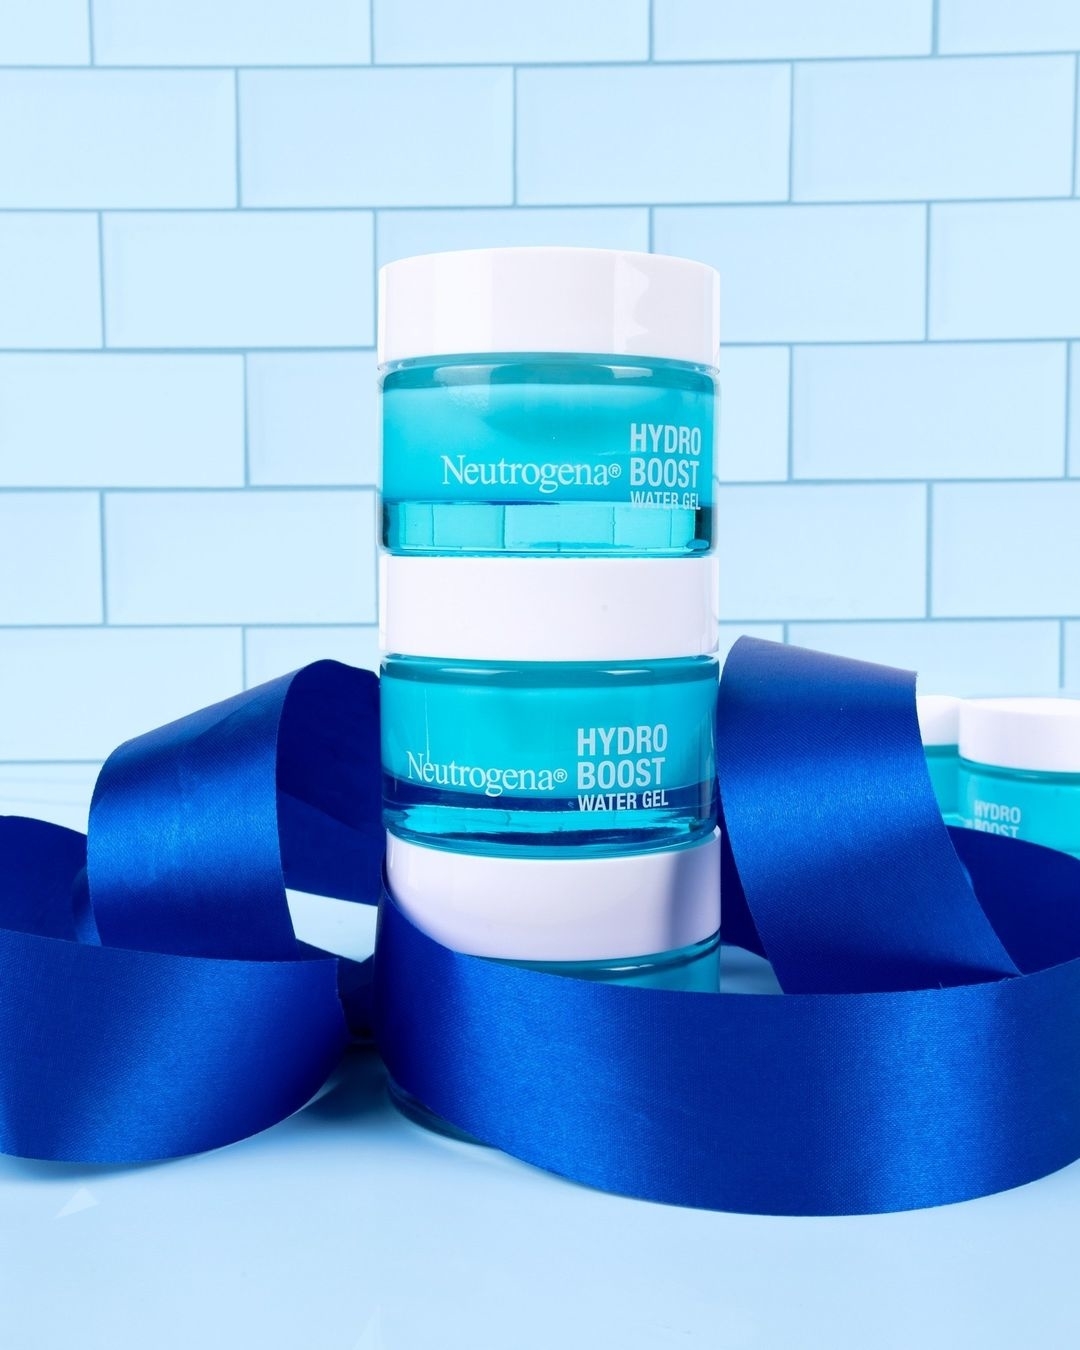 Neutrogena Hydro Boost moisturizer jars wrapped with a blue ribbon against a blue-tiled background